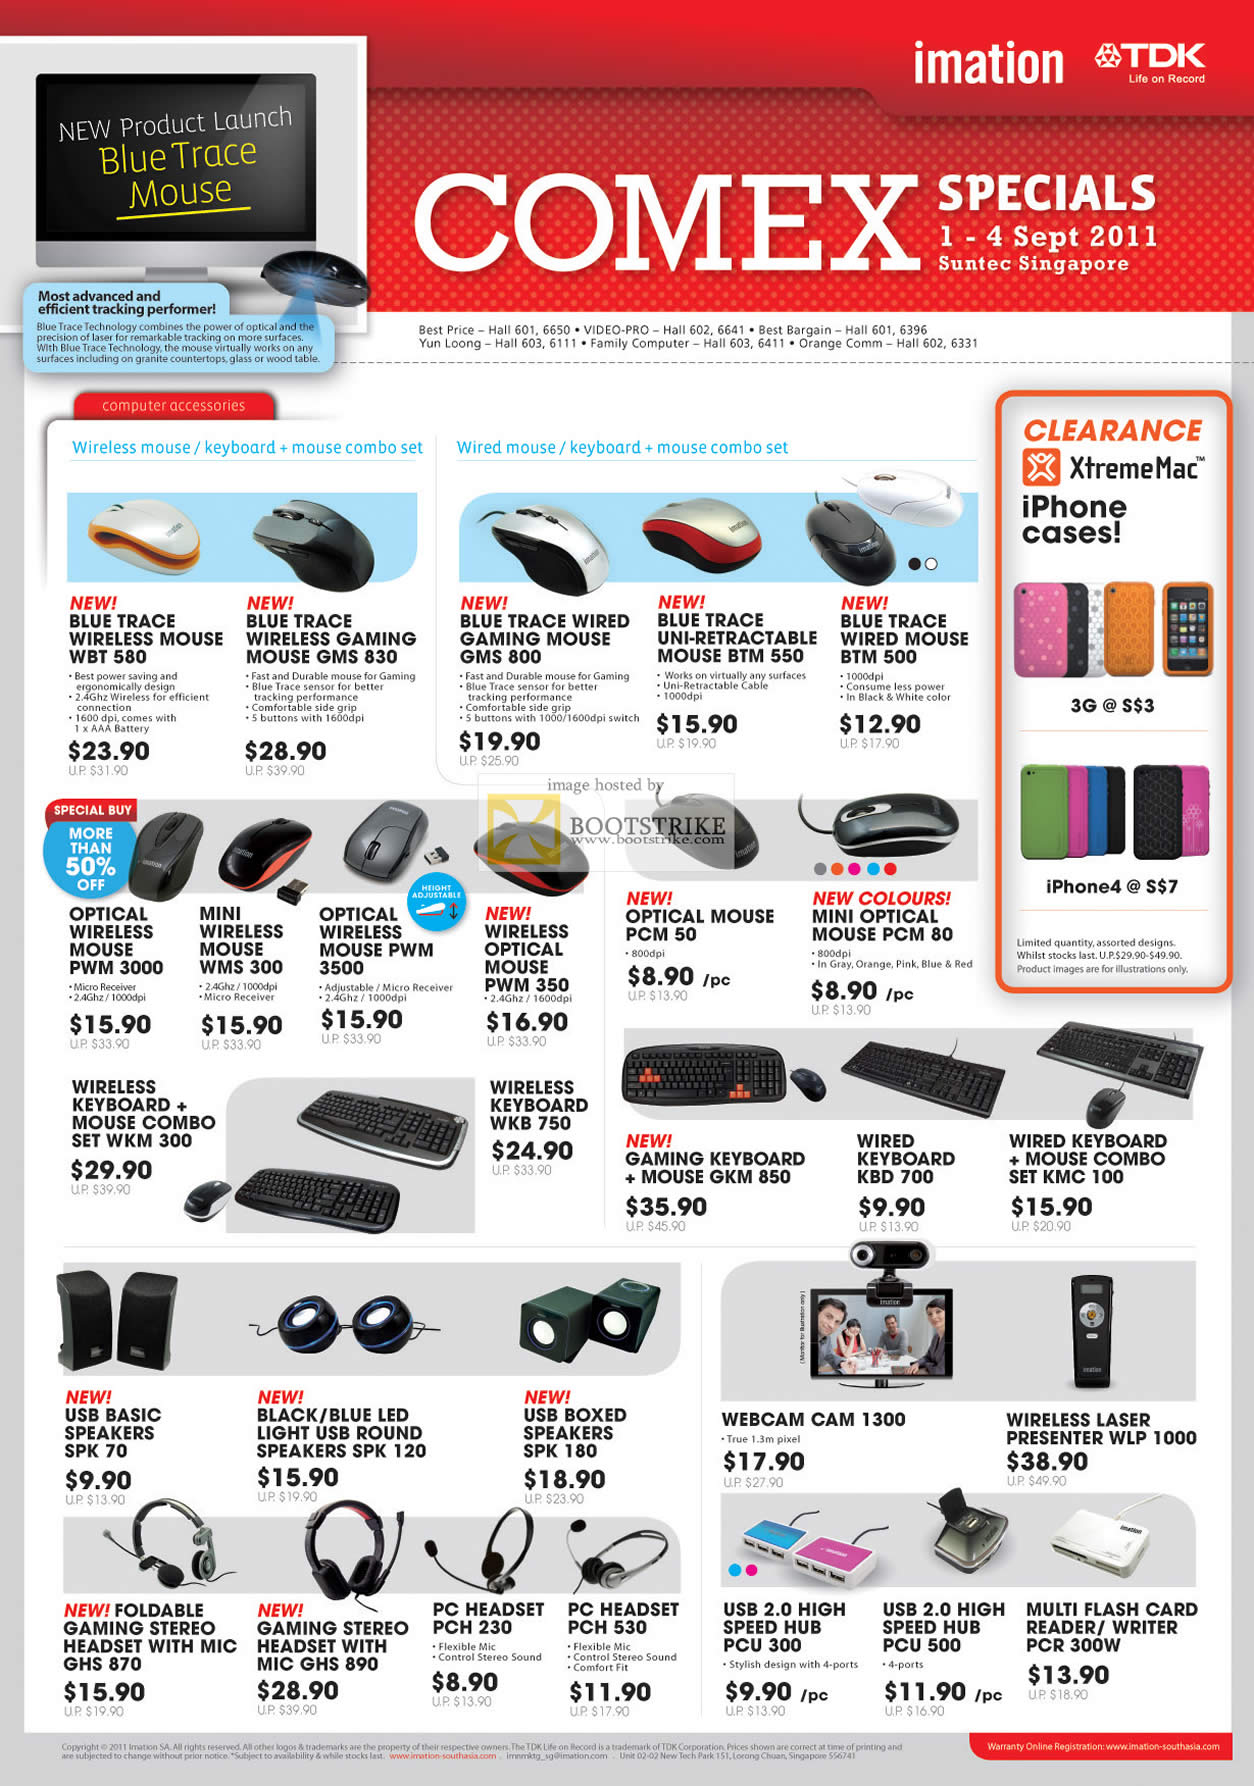 COMEX 2011 price list image brochure of Imation Mouse Keyboard Wireless Laser Gaming XtremeMac IPhone Case Speakers Webcam Laser Presenter Headset USB Hub Card Reader